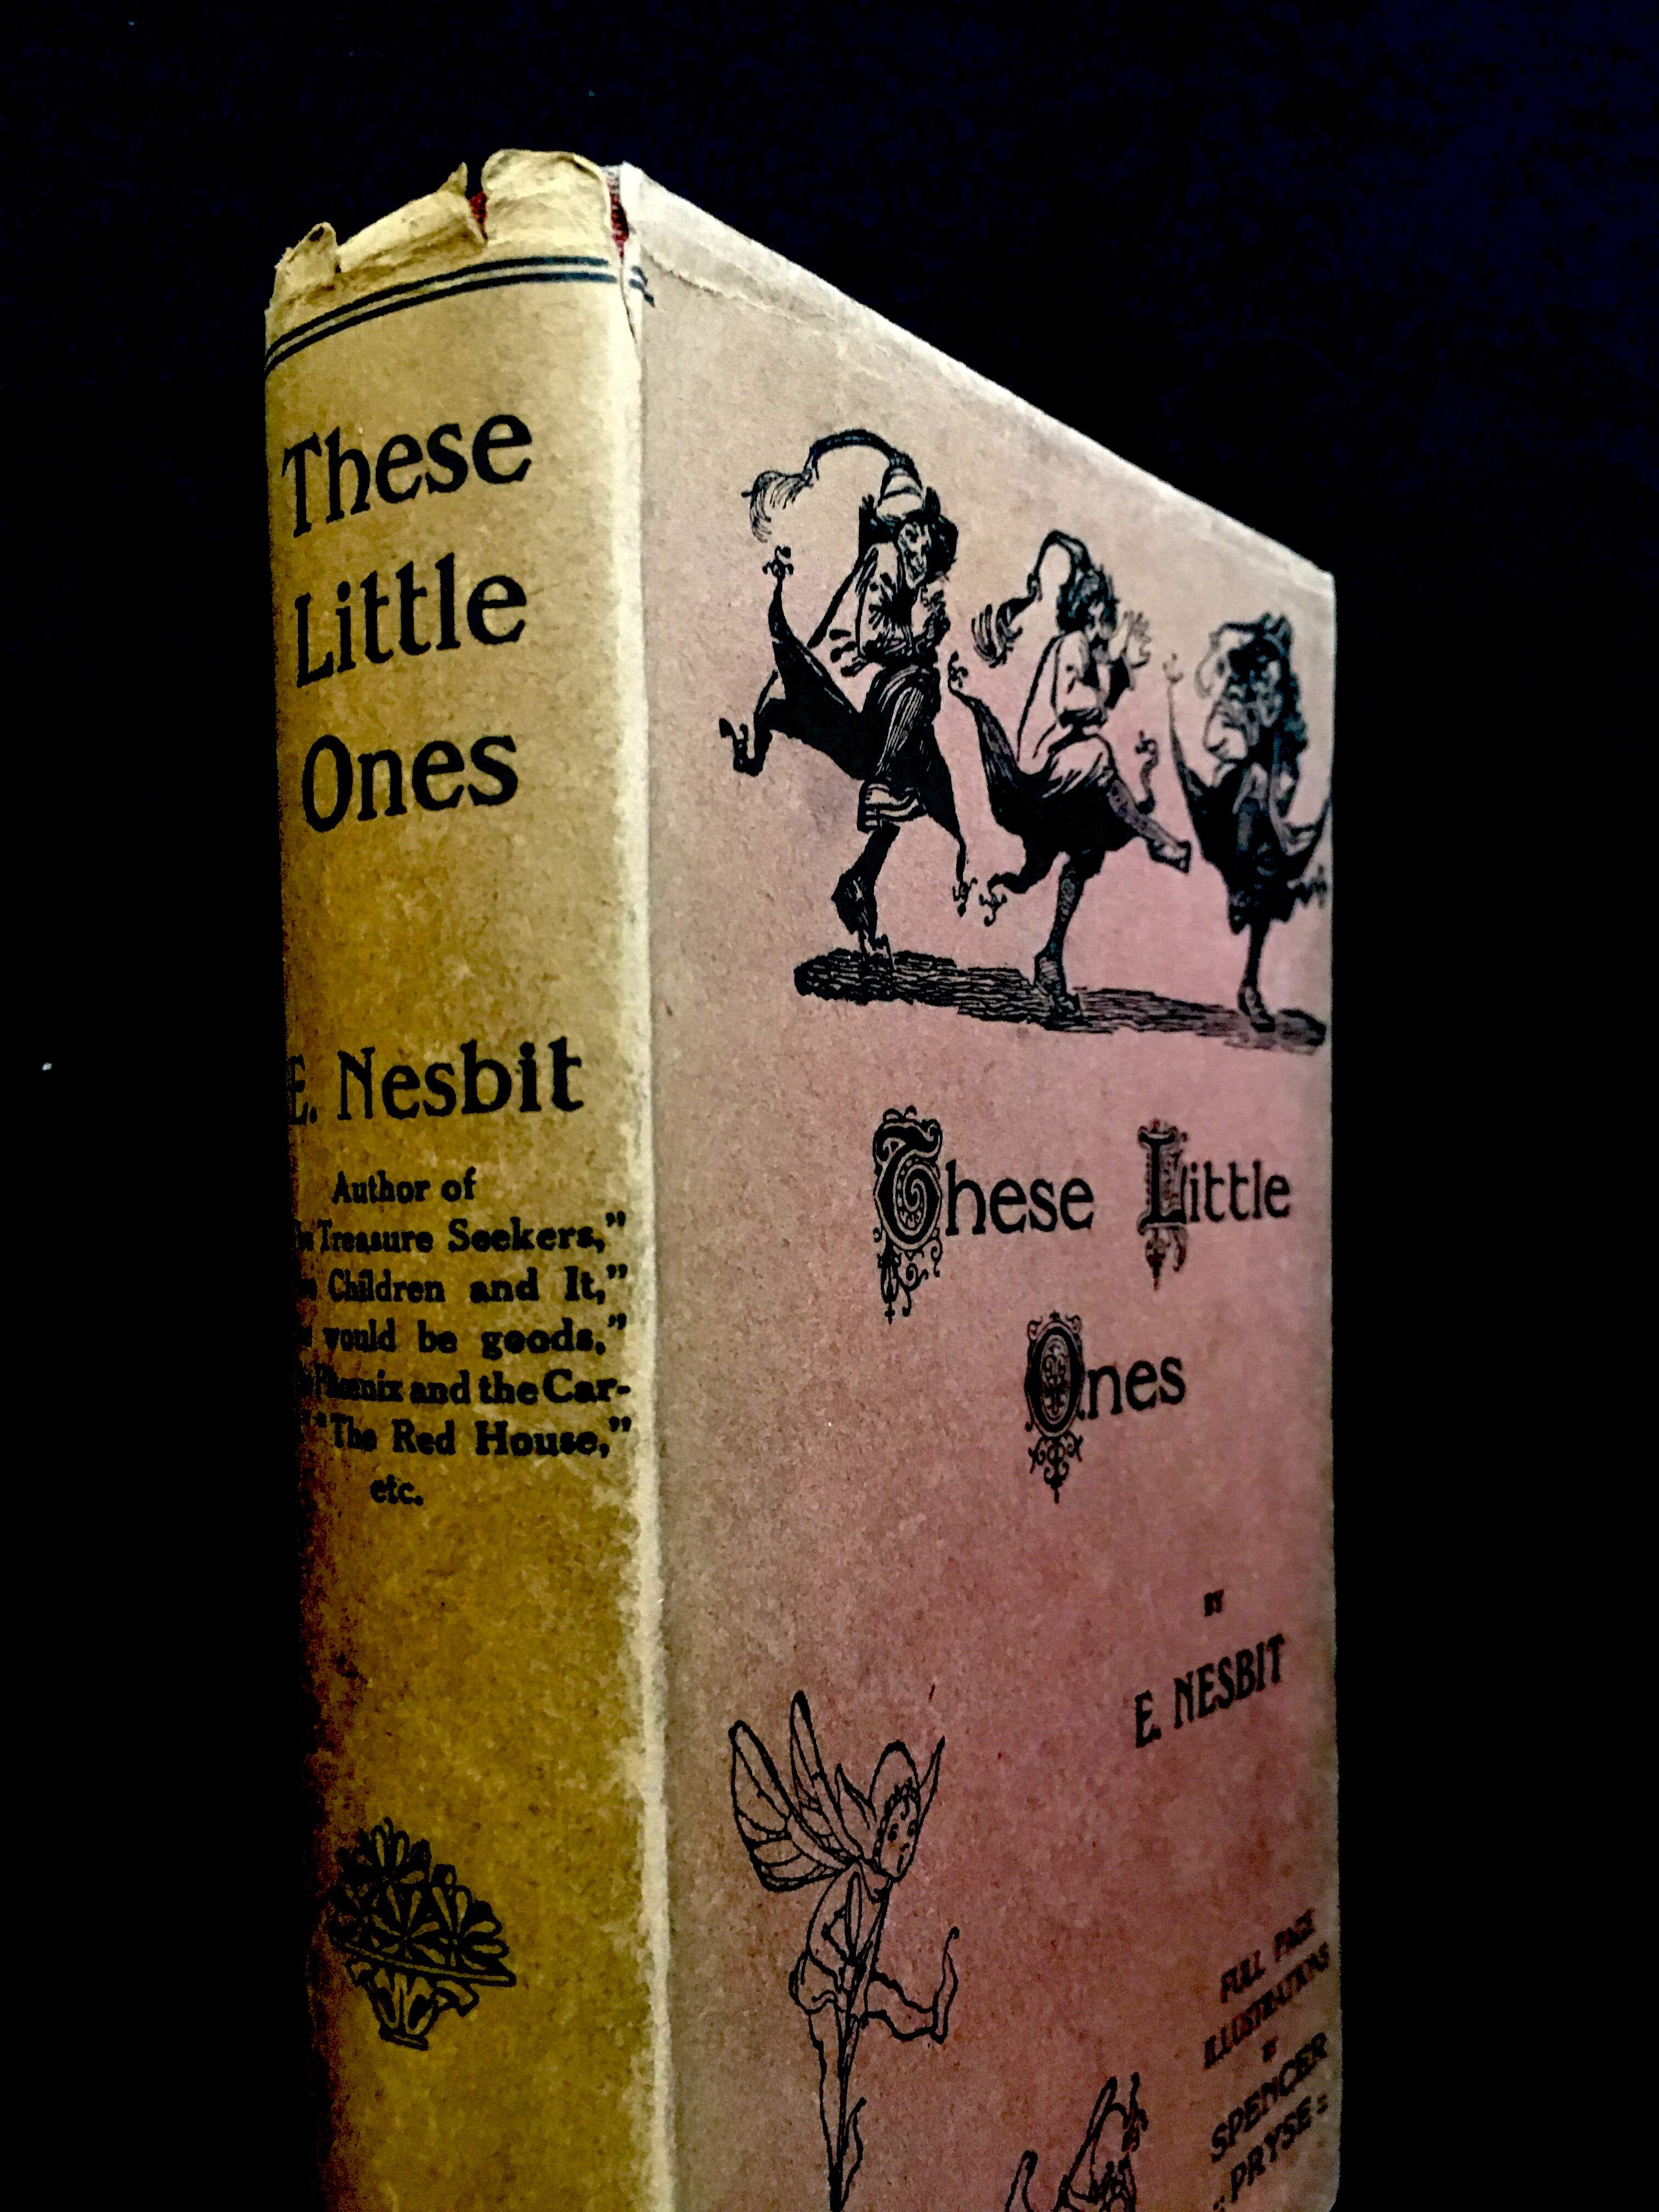 These Little Ones by E. Nesbit